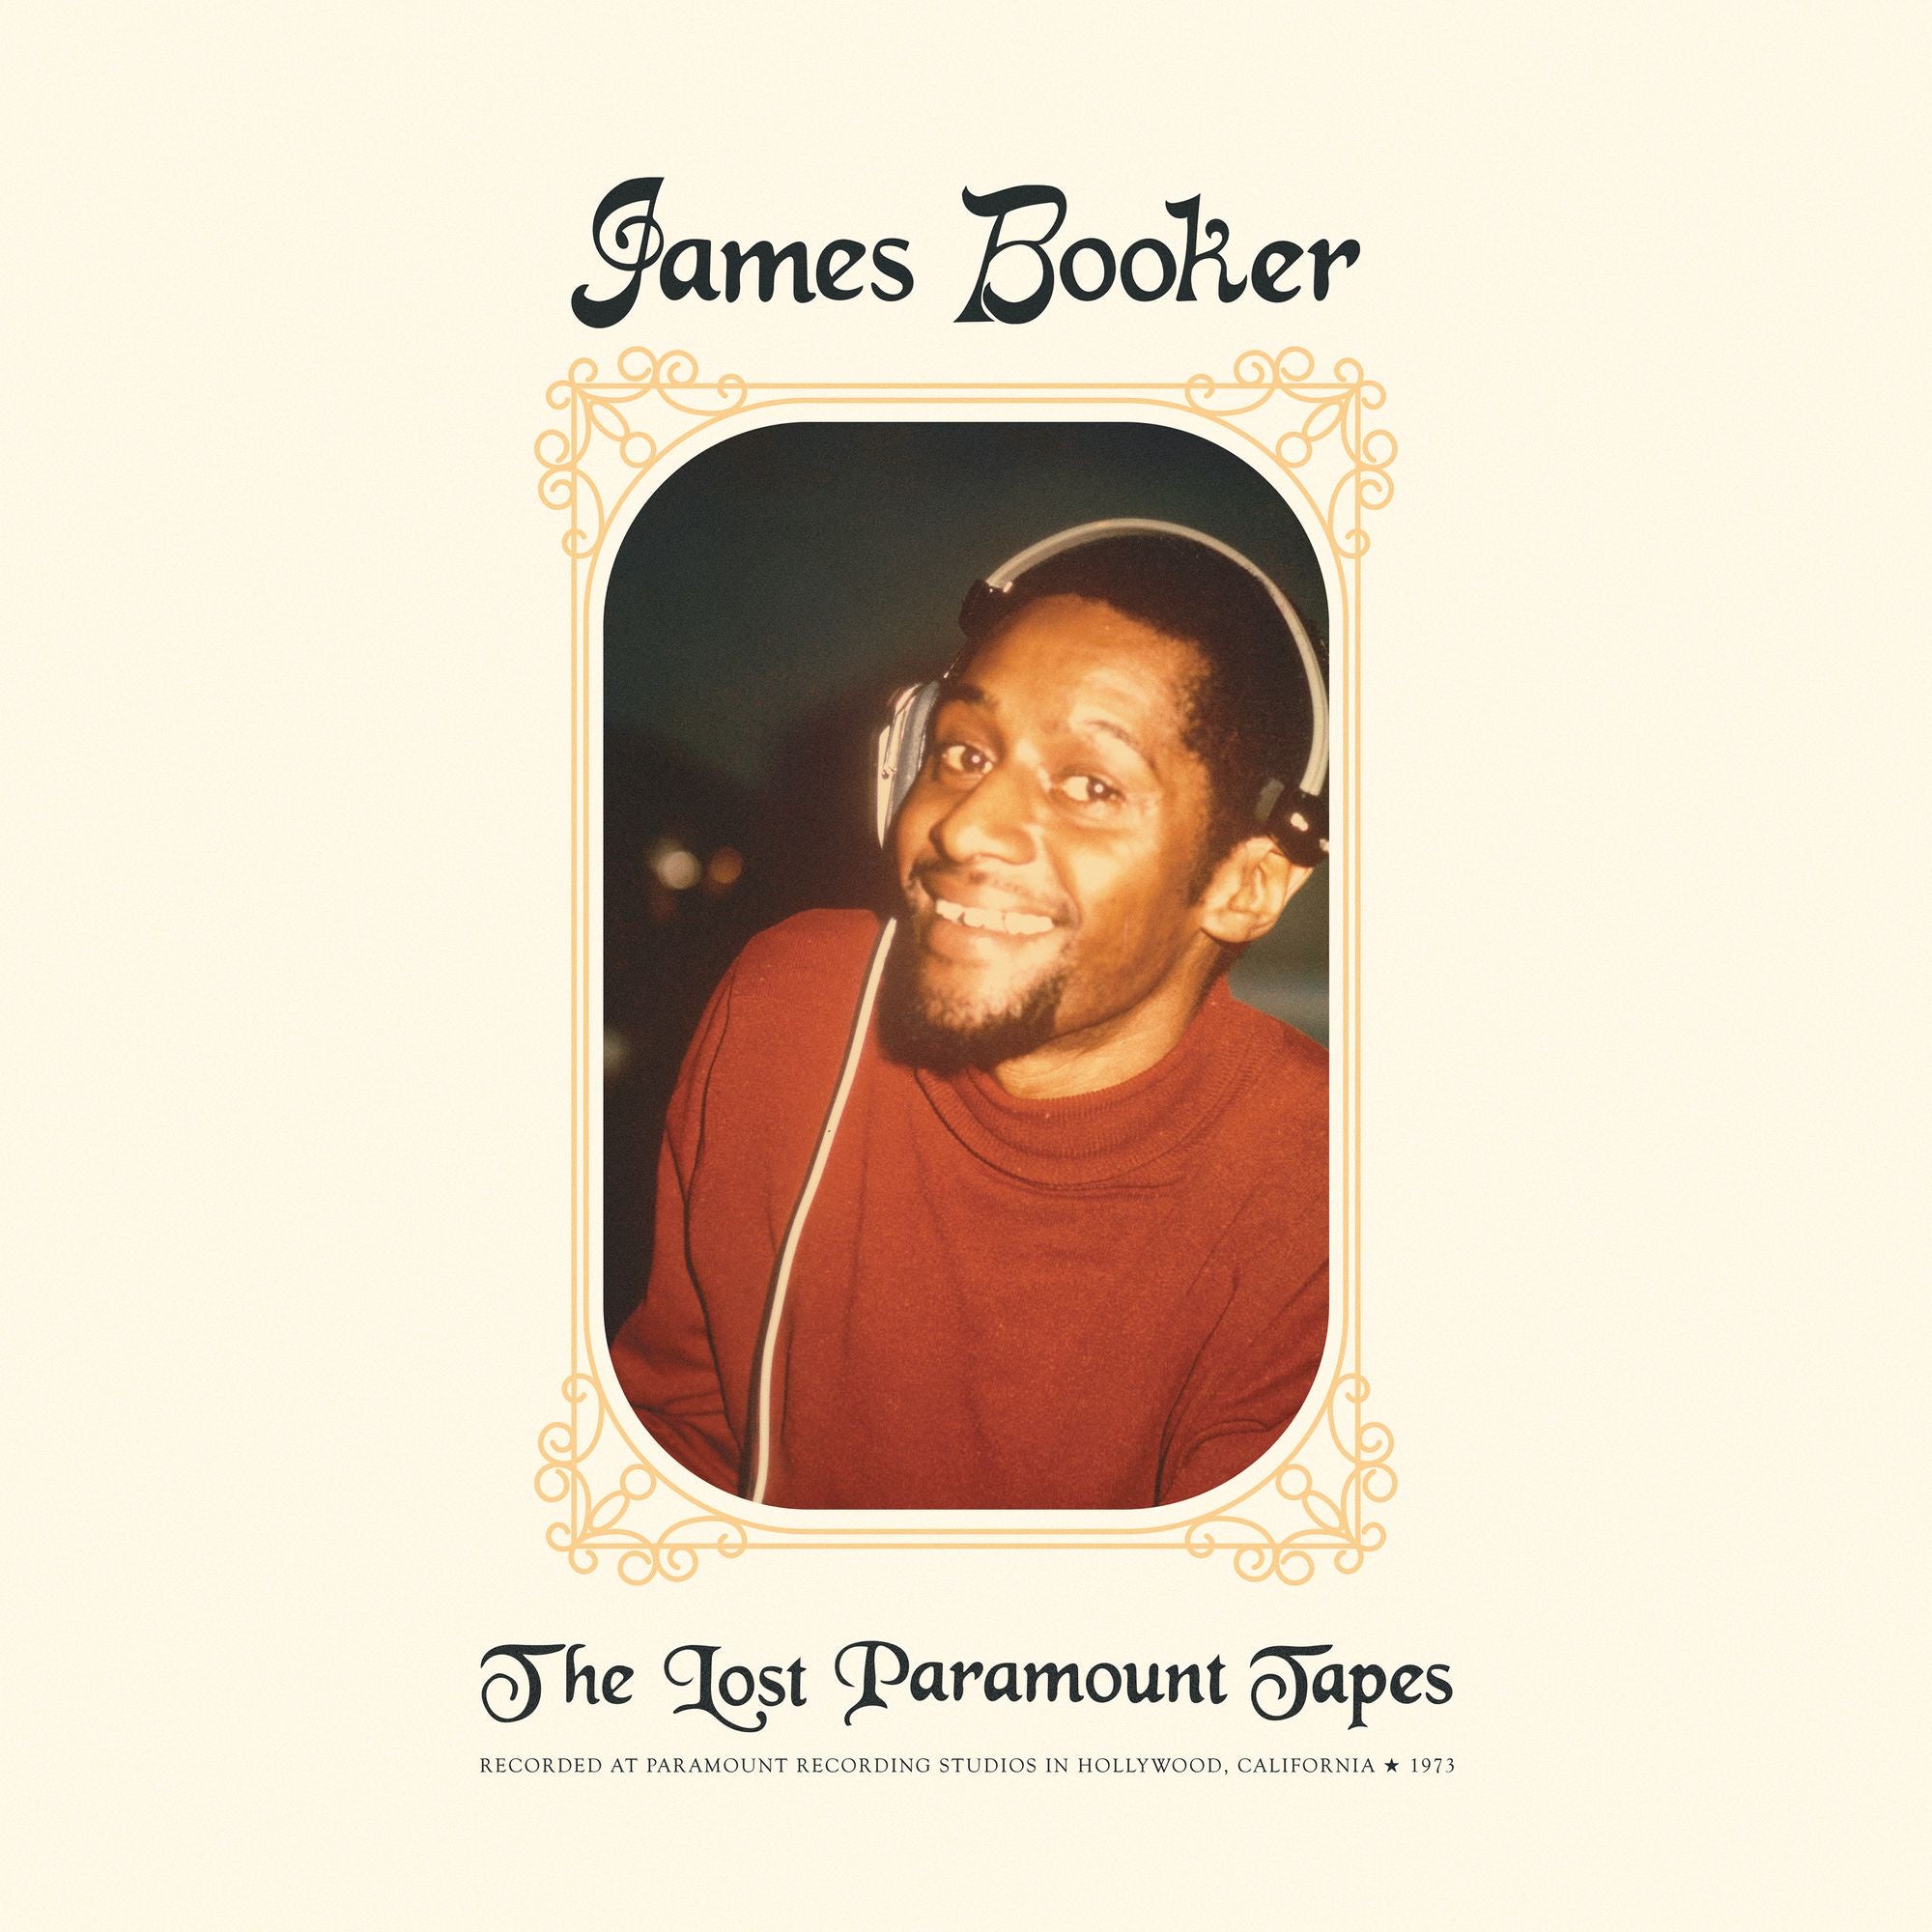 James Booker - The Lost Paramount Tapes (1973) - New Vinyl Lp 2018 Thirty Tigers Reissue - Soul Jazz / Piano Blues